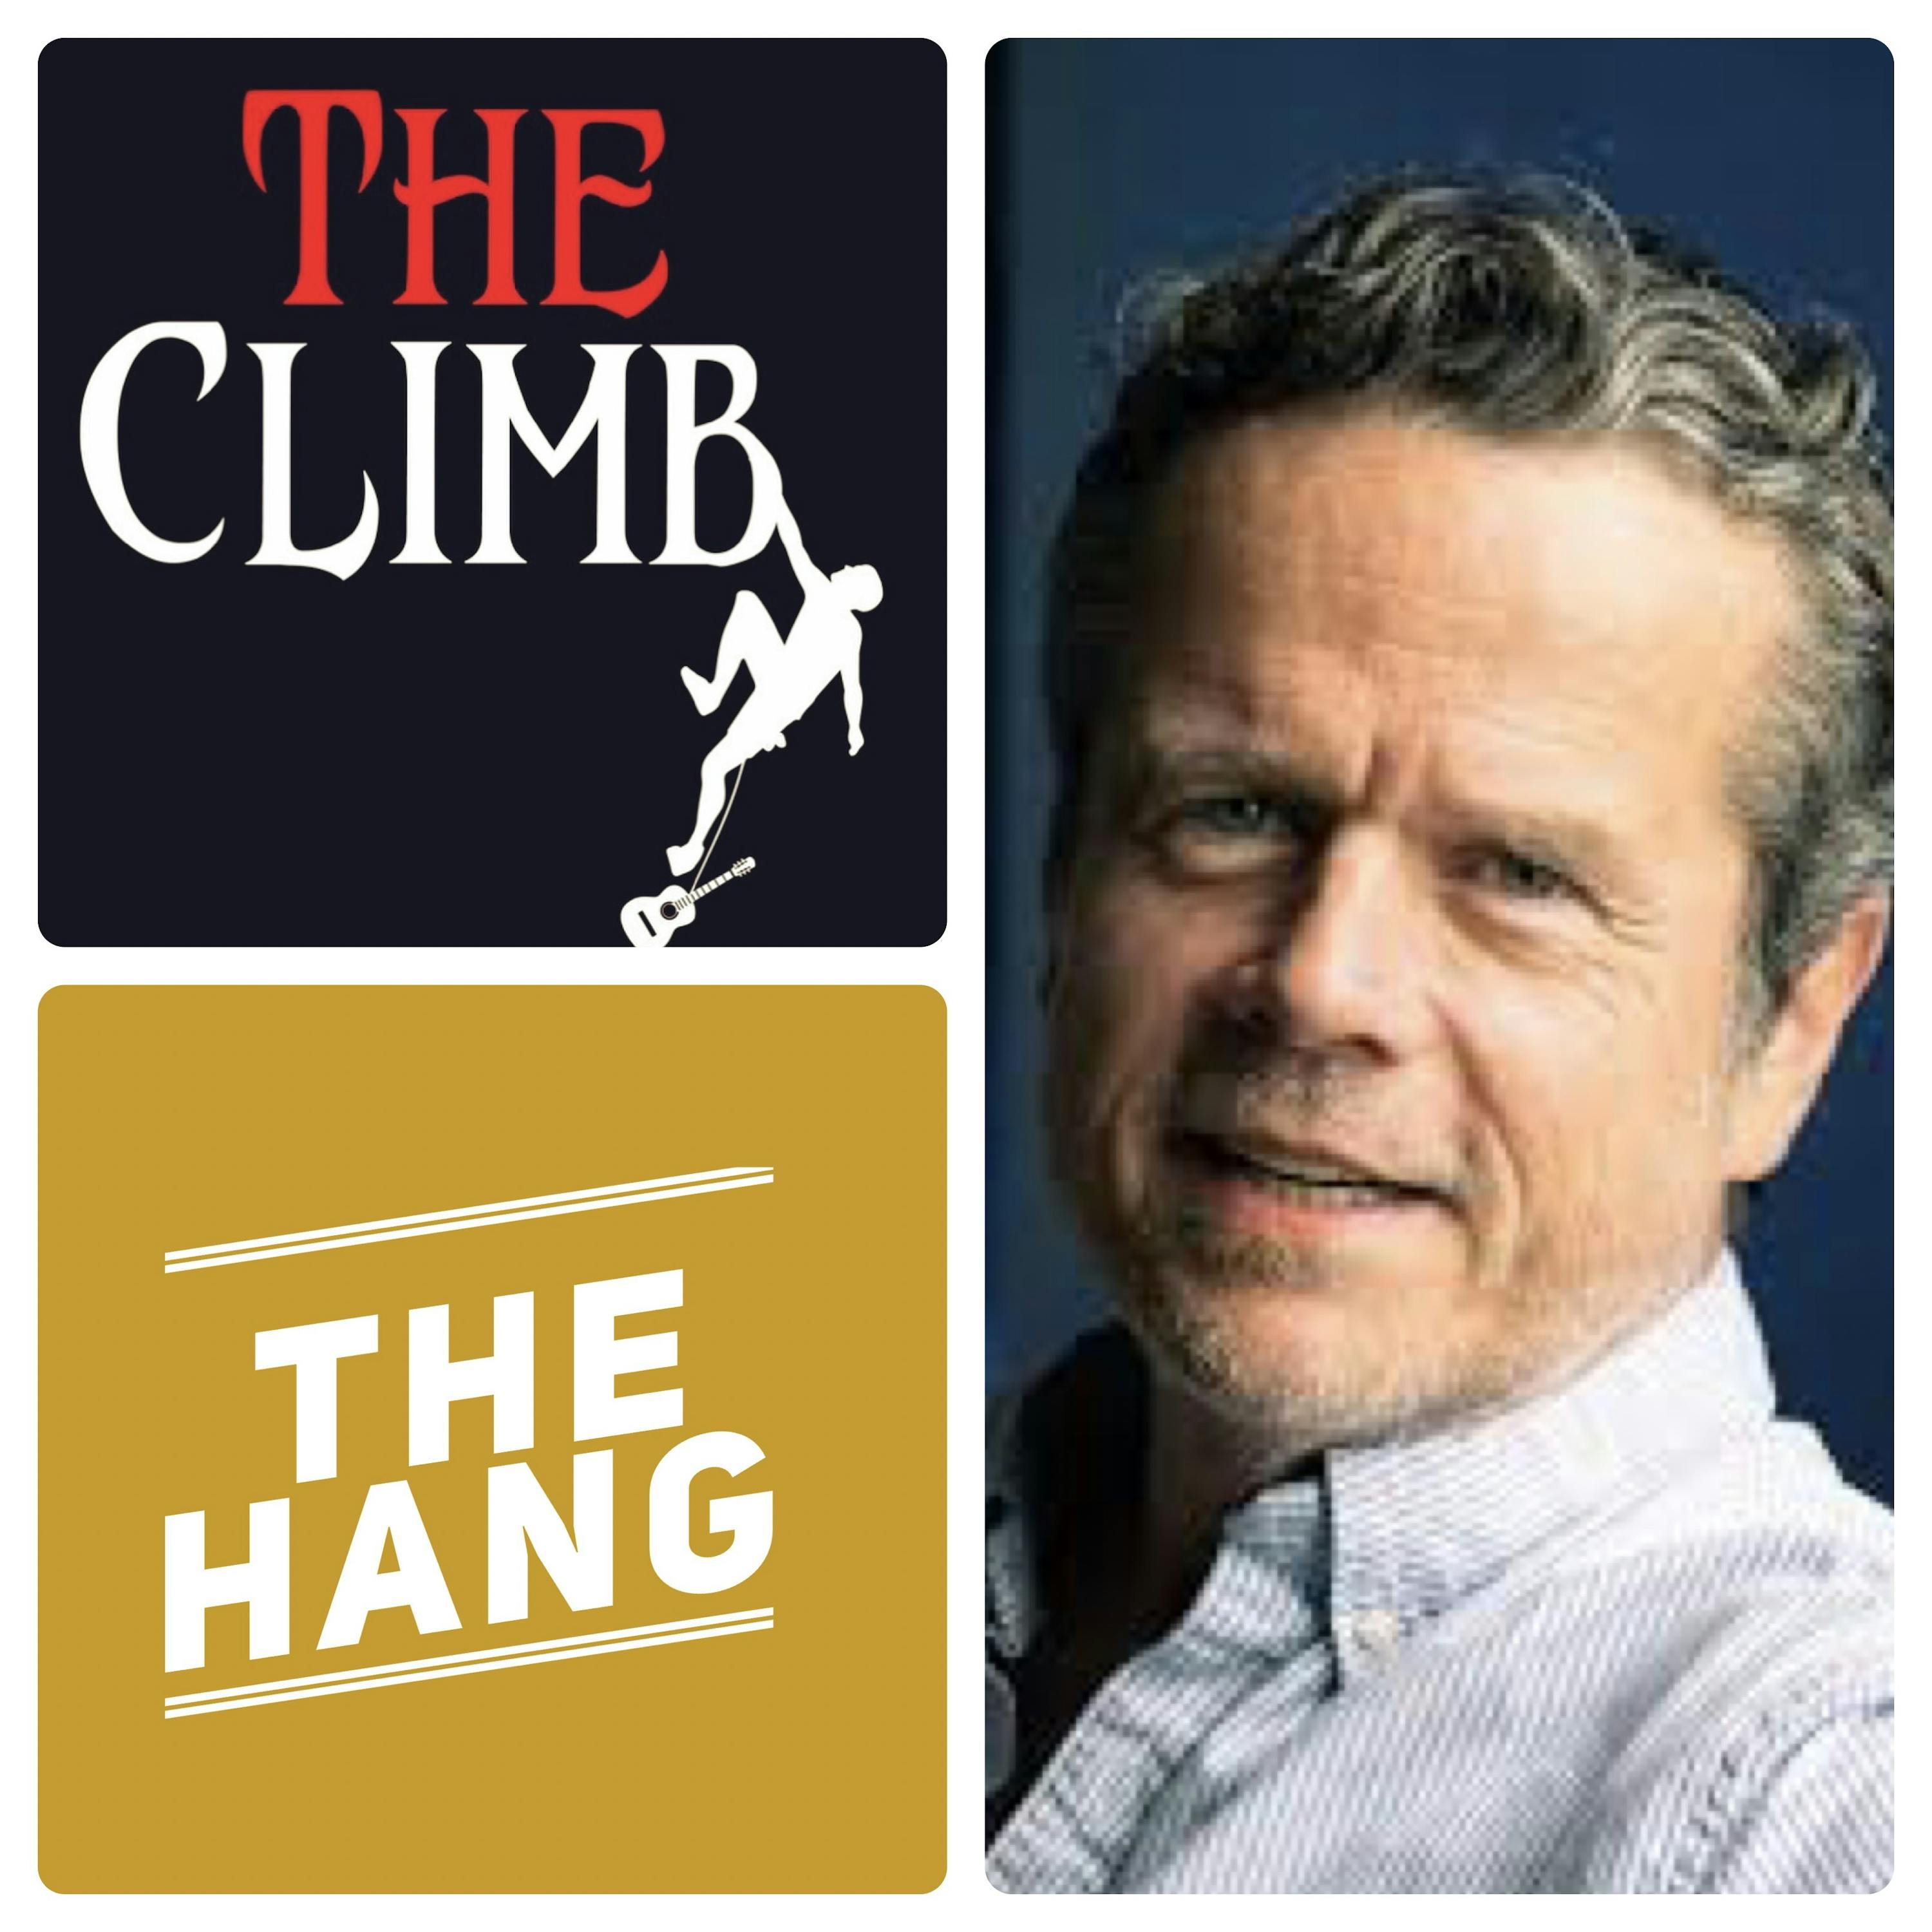 Songwriting Pro’s ”The Hang” with Hit Songwriter, Jim McCormick